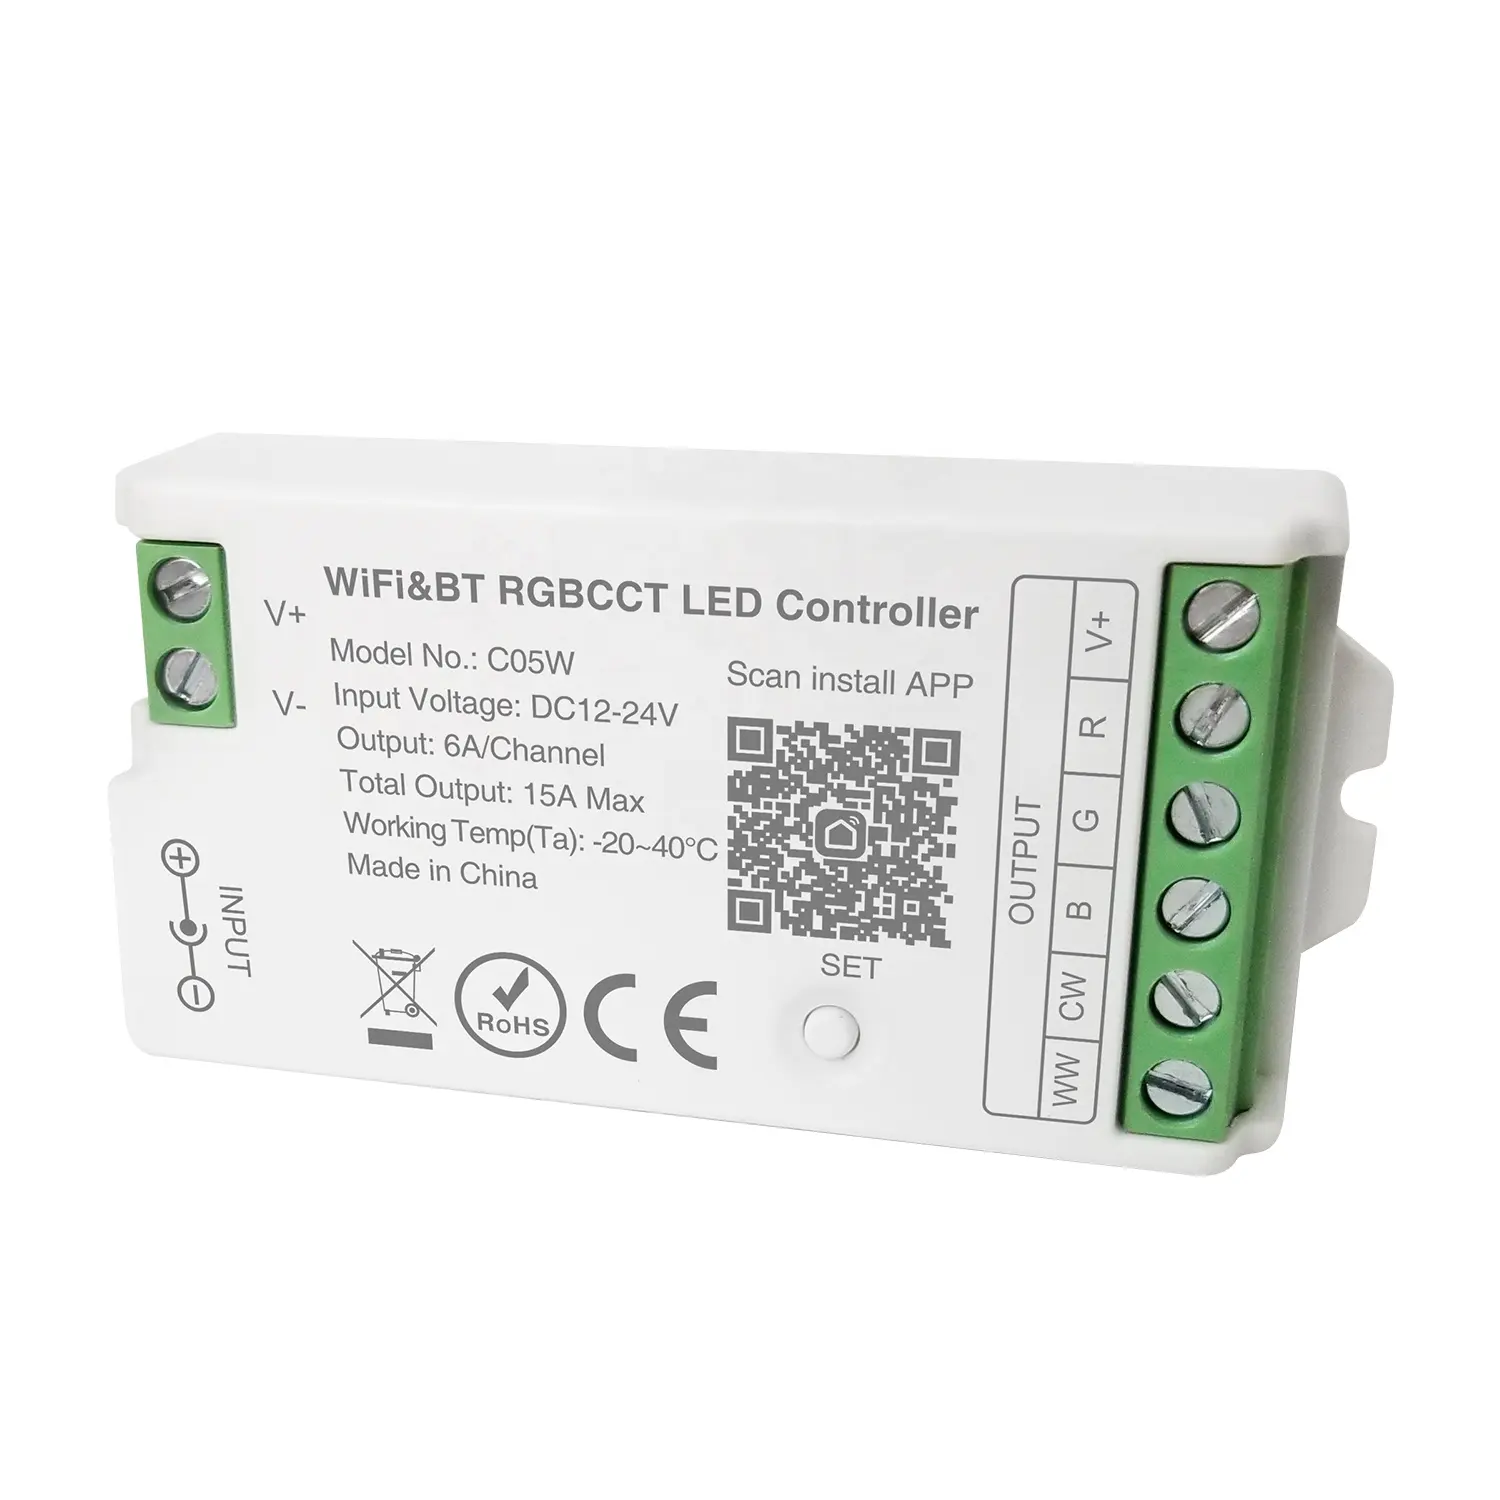 The dimmer is applied to a variety of RGBCCT light strips Support WiFi and APP 2.4G Hz signal high tech RGBCCT controller